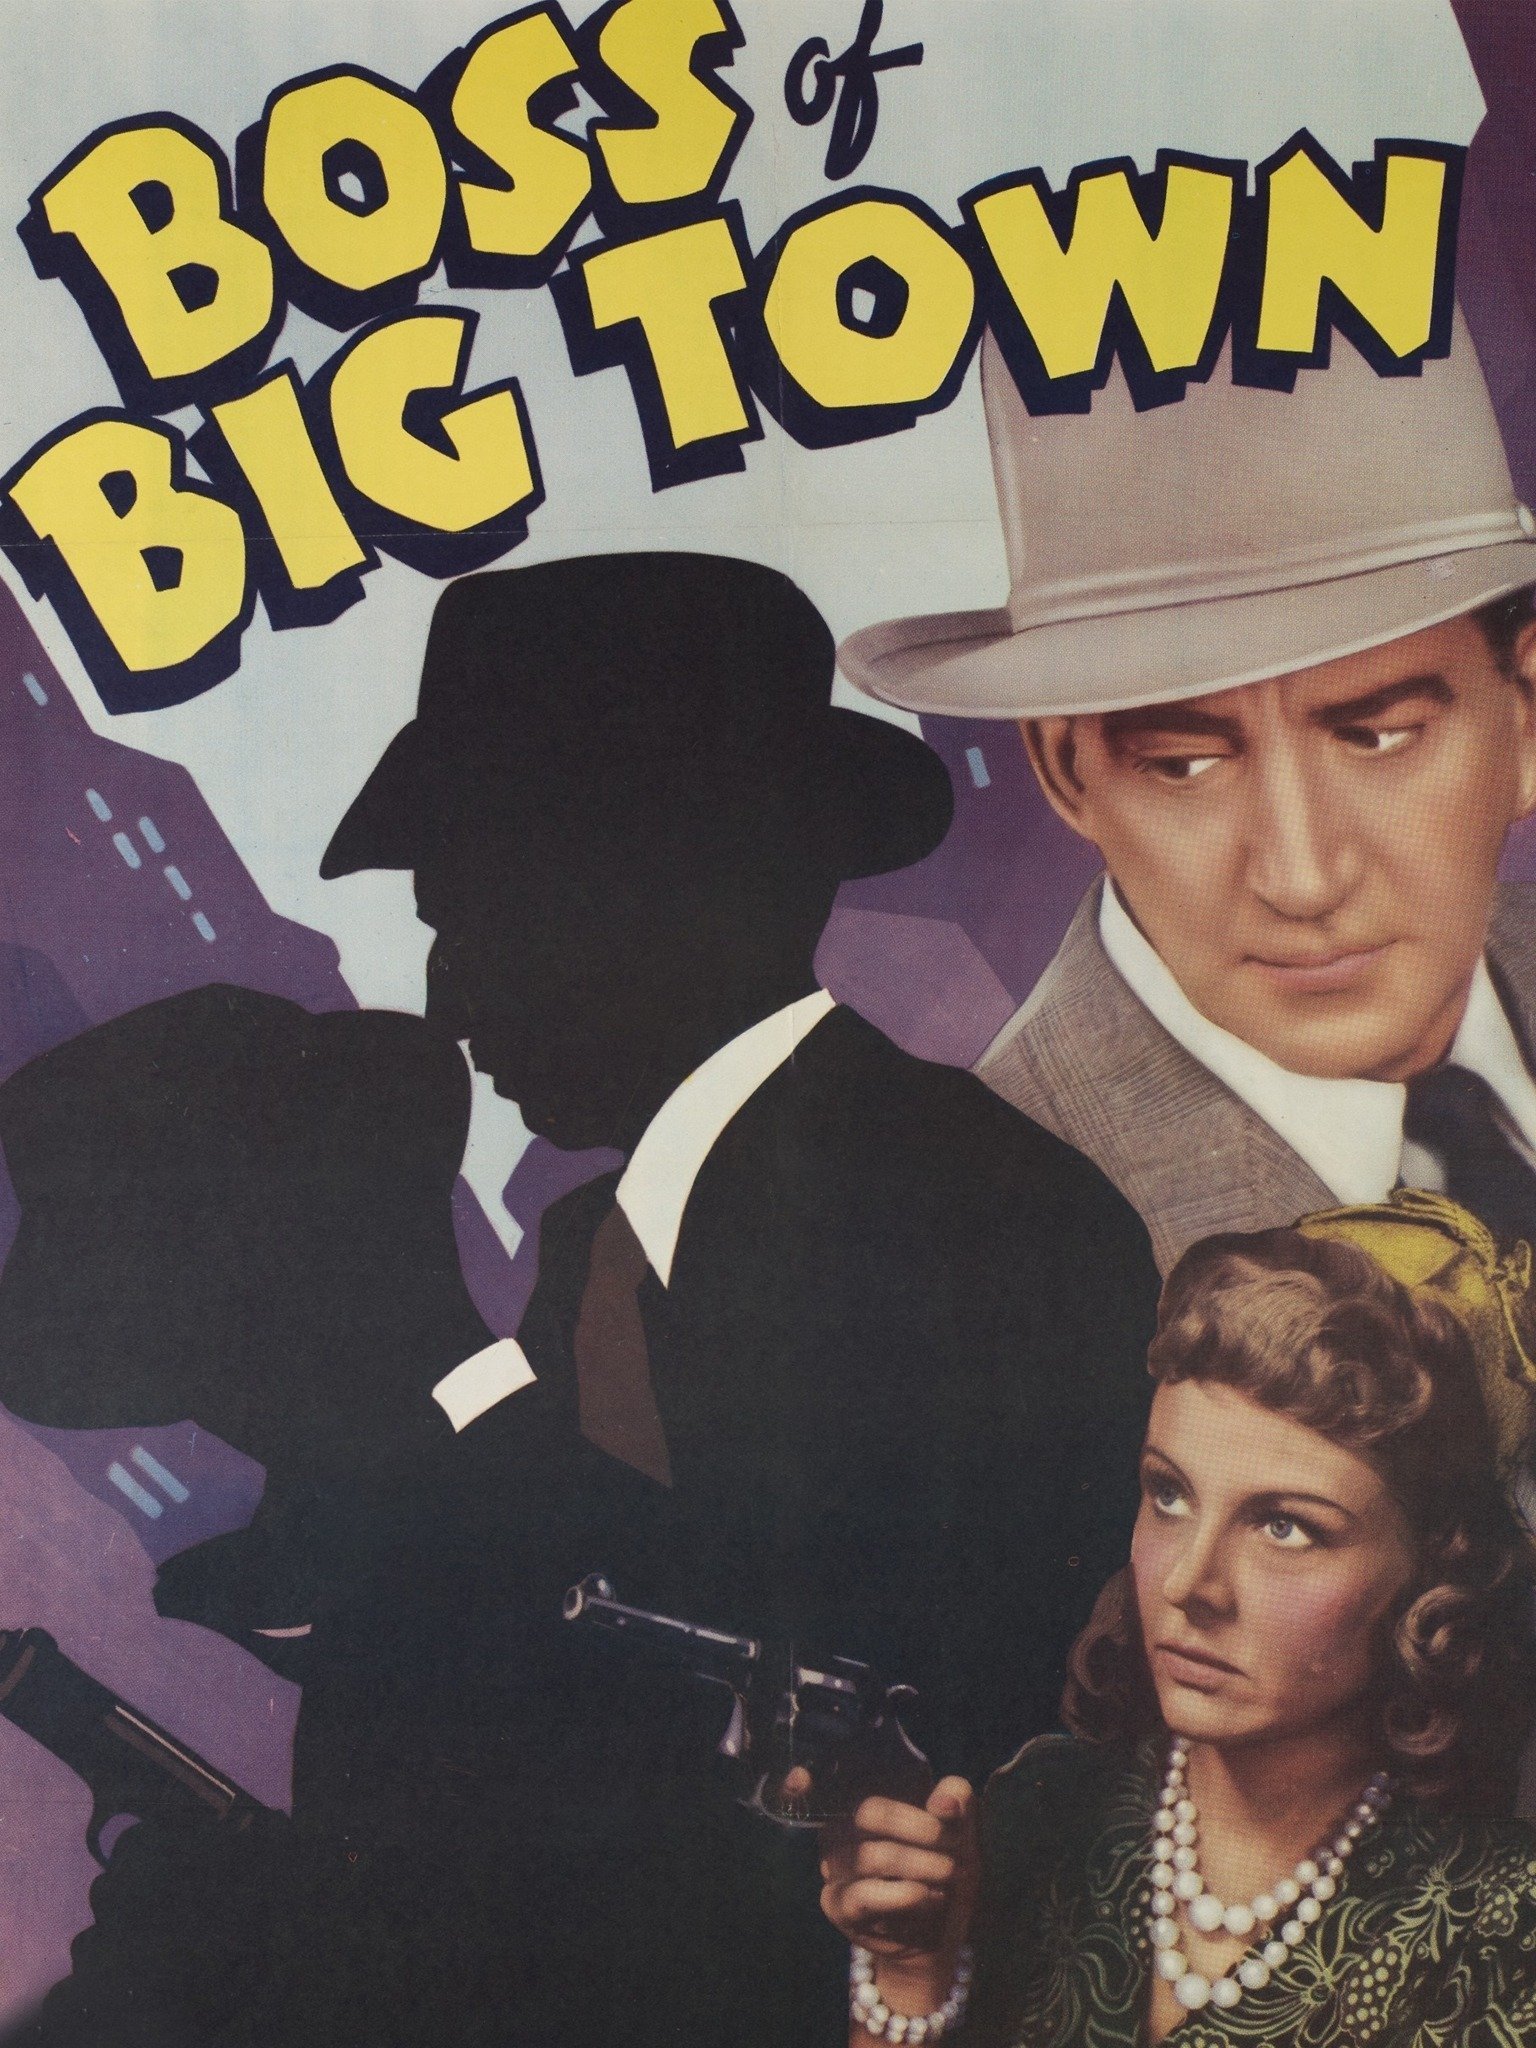 The Boss of Big Town movie poster